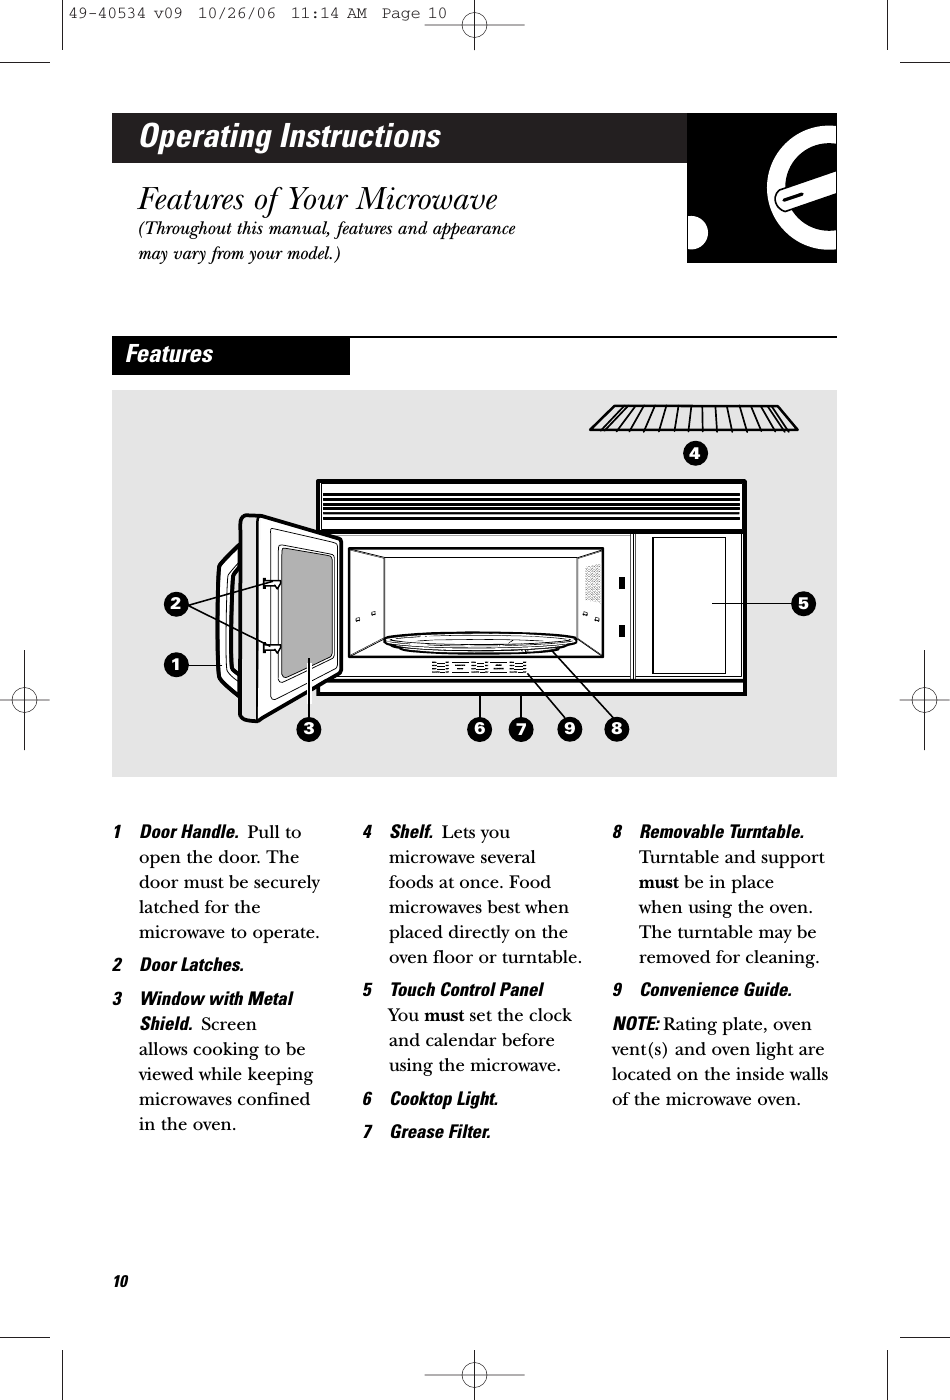 Operating InstructionsFeatures of Your Microwave(Throughout this manual, features and appearancemay vary from your model.)1 Door Handle.  Pull toopen the door. Thedoor must be securelylatched for themicrowave to operate.2 Door Latches.3 Window with MetalShield.  Screen allows cooking to beviewed while keepingmicrowaves confined in the oven.4 Shelf.  Lets youmicrowave several foods at once. Foodmicrowaves best whenplaced directly on theoven floor or turntable. 5 Touch Control Panel You must set the clockand calendar beforeusing the microwave. 6 Cooktop Light.7 Grease Filter.8 Removable Turntable.Turntable and supportmust be in place when using the oven.The turntable may beremoved for cleaning.9 Convenience Guide.NOTE: Rating plate, ovenvent(s) and oven light arelocated on the inside wallsof the microwave oven.Features41251063 98749-40534 v09  10/26/06  11:14 AM  Page 10